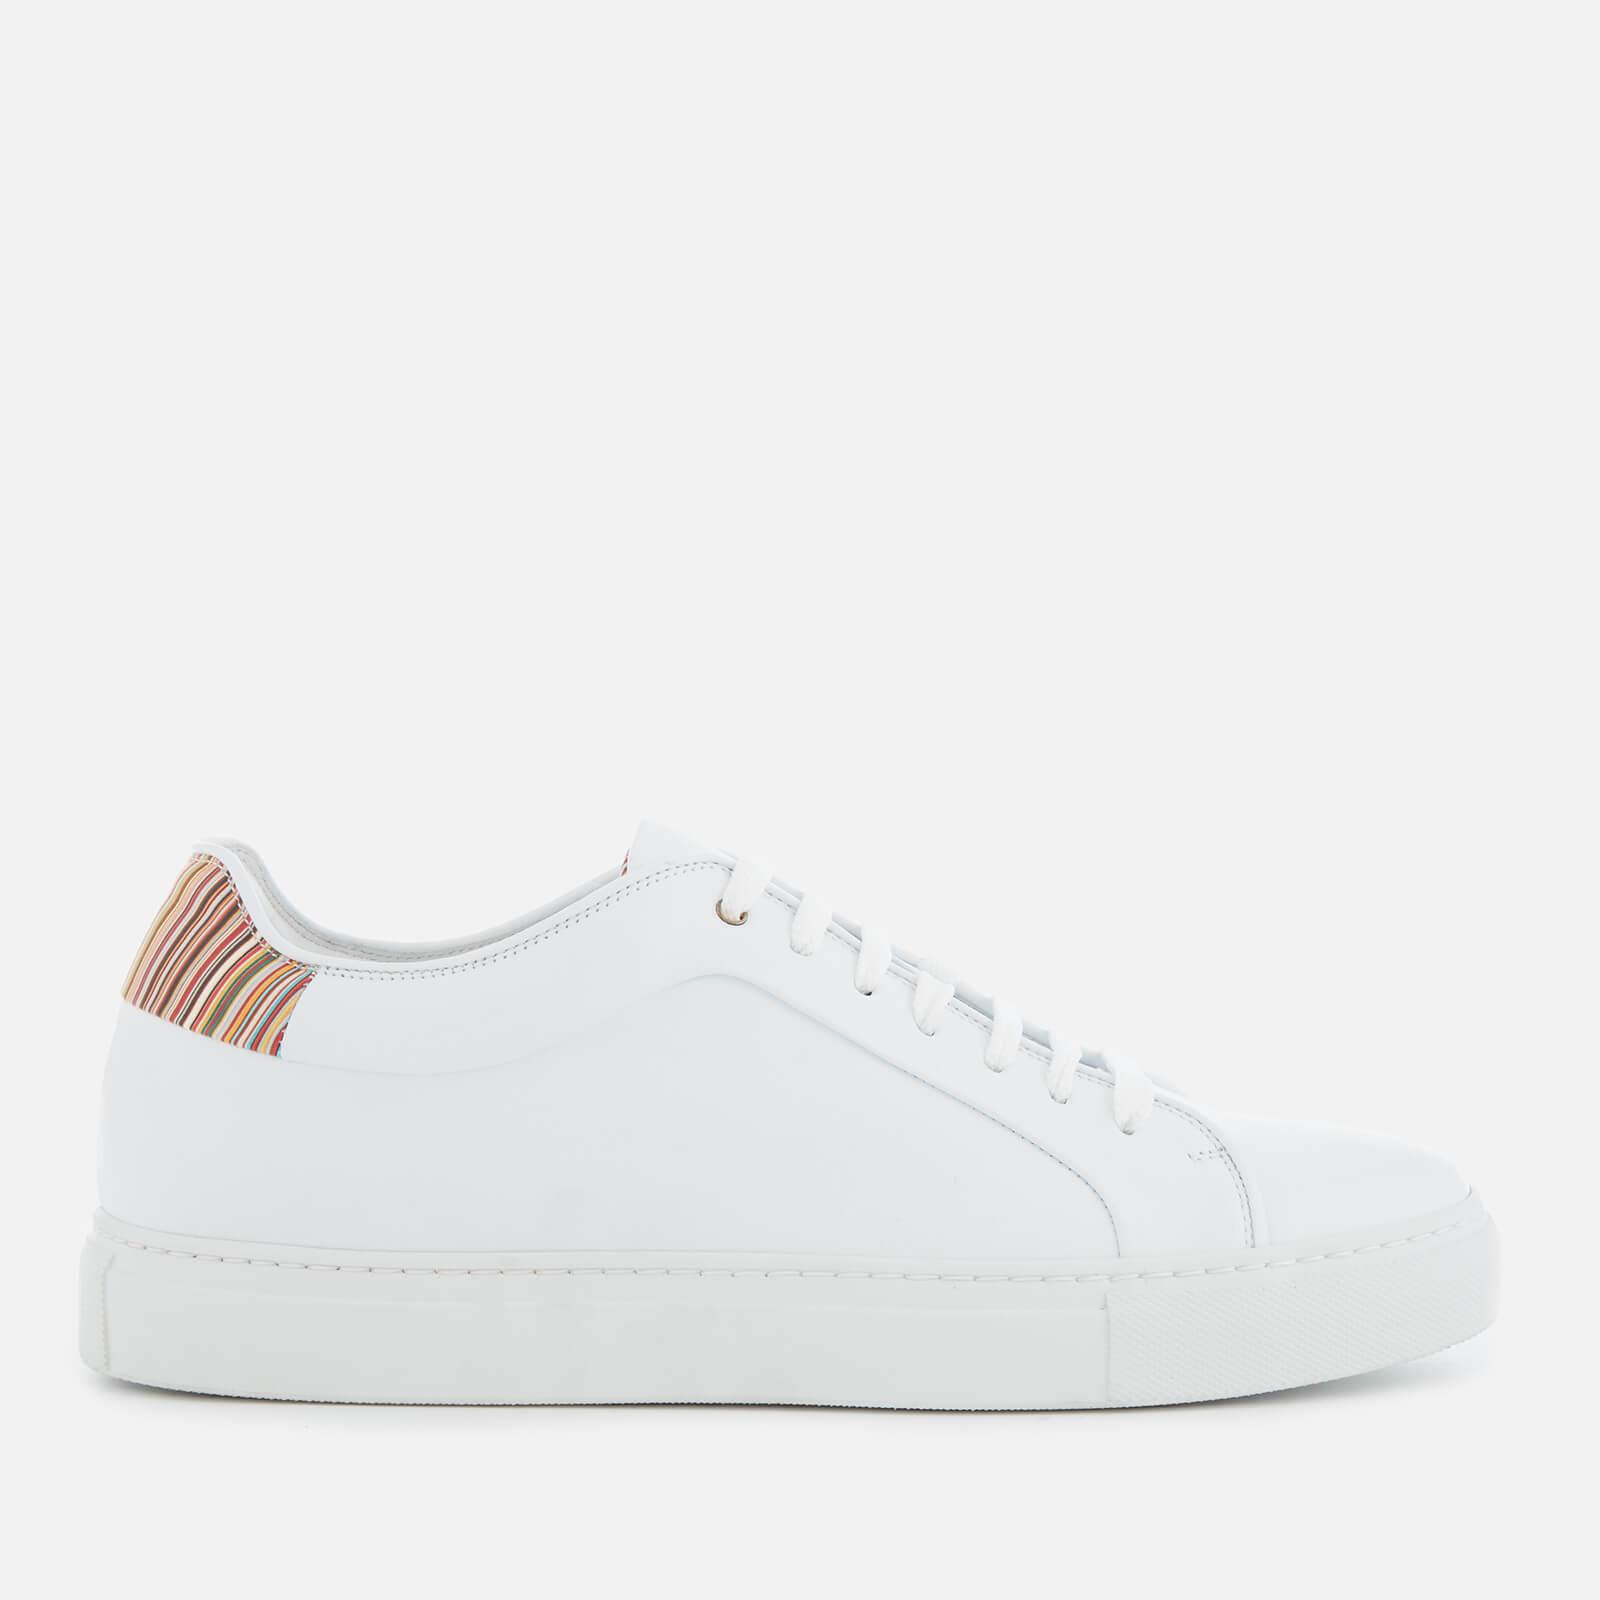 Paul Smith Basso Leather Cupsole Trainers in White for Men - Save 4% - Lyst